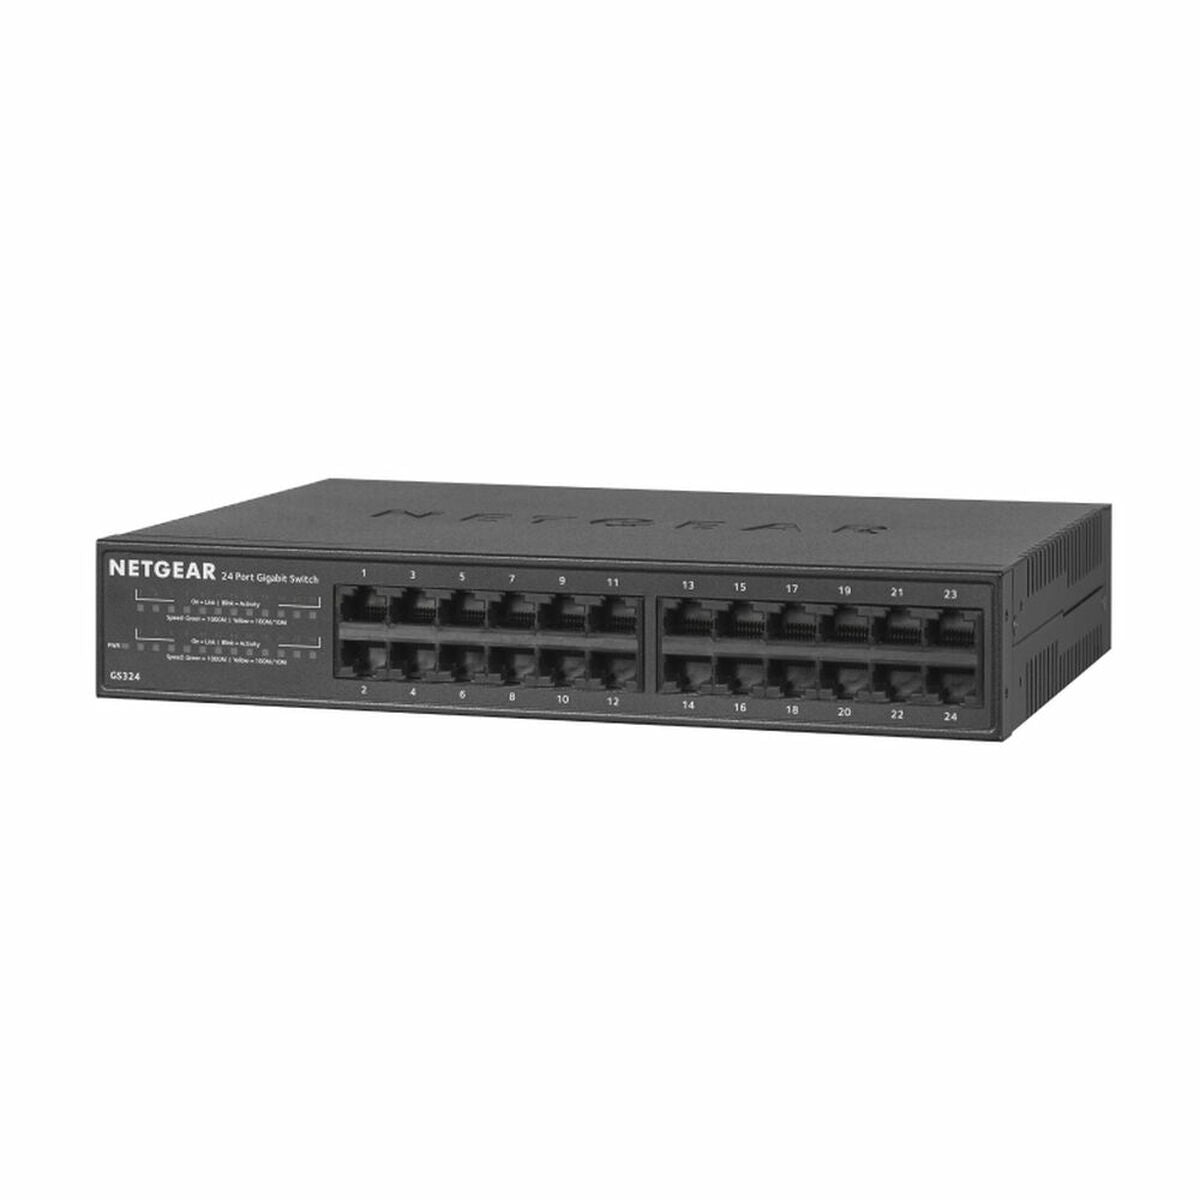 Switch Netgear GS324-200EUS 48 Gbps, Netgear, Computing, Network devices, switch-netgear-gs324-200eus-48-gbps-1, Brand_Netgear, category-reference-2609, category-reference-2803, category-reference-2827, category-reference-t-19685, category-reference-t-19914, Condition_NEW, networks/wiring, Price_100 - 200, Teleworking, RiotNook